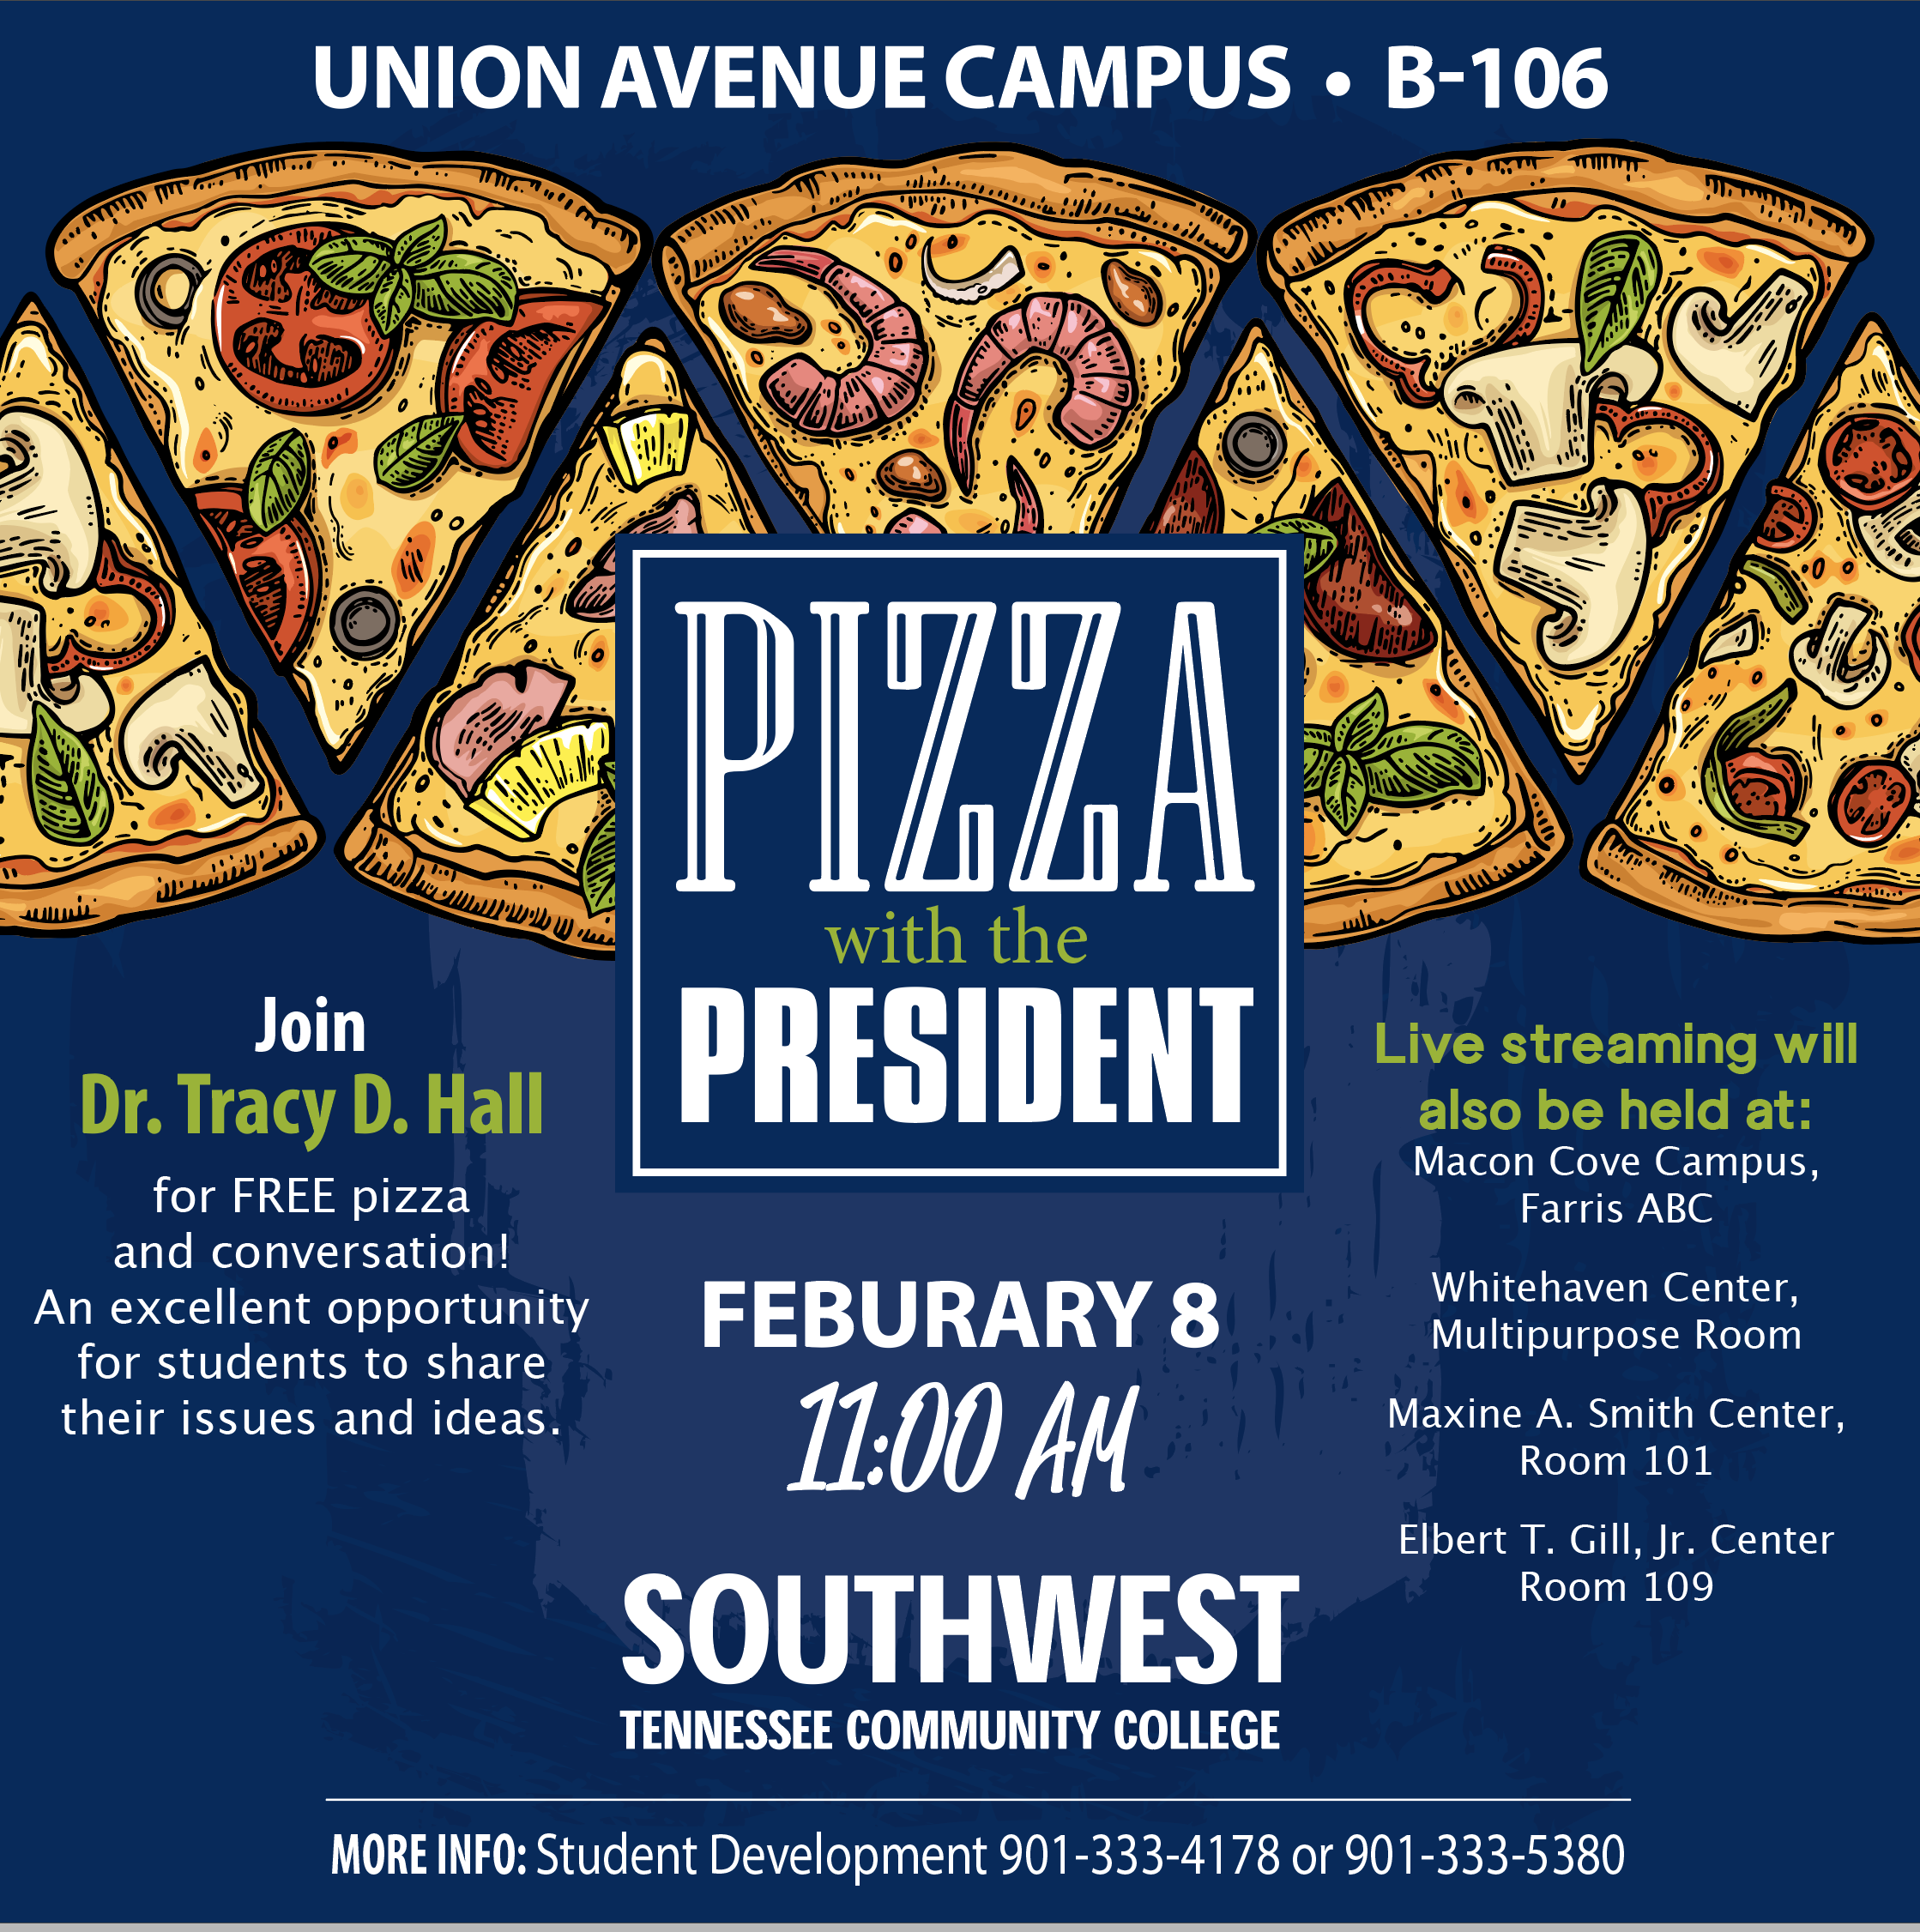 Save the Date for Pizza with the President Feb. 8